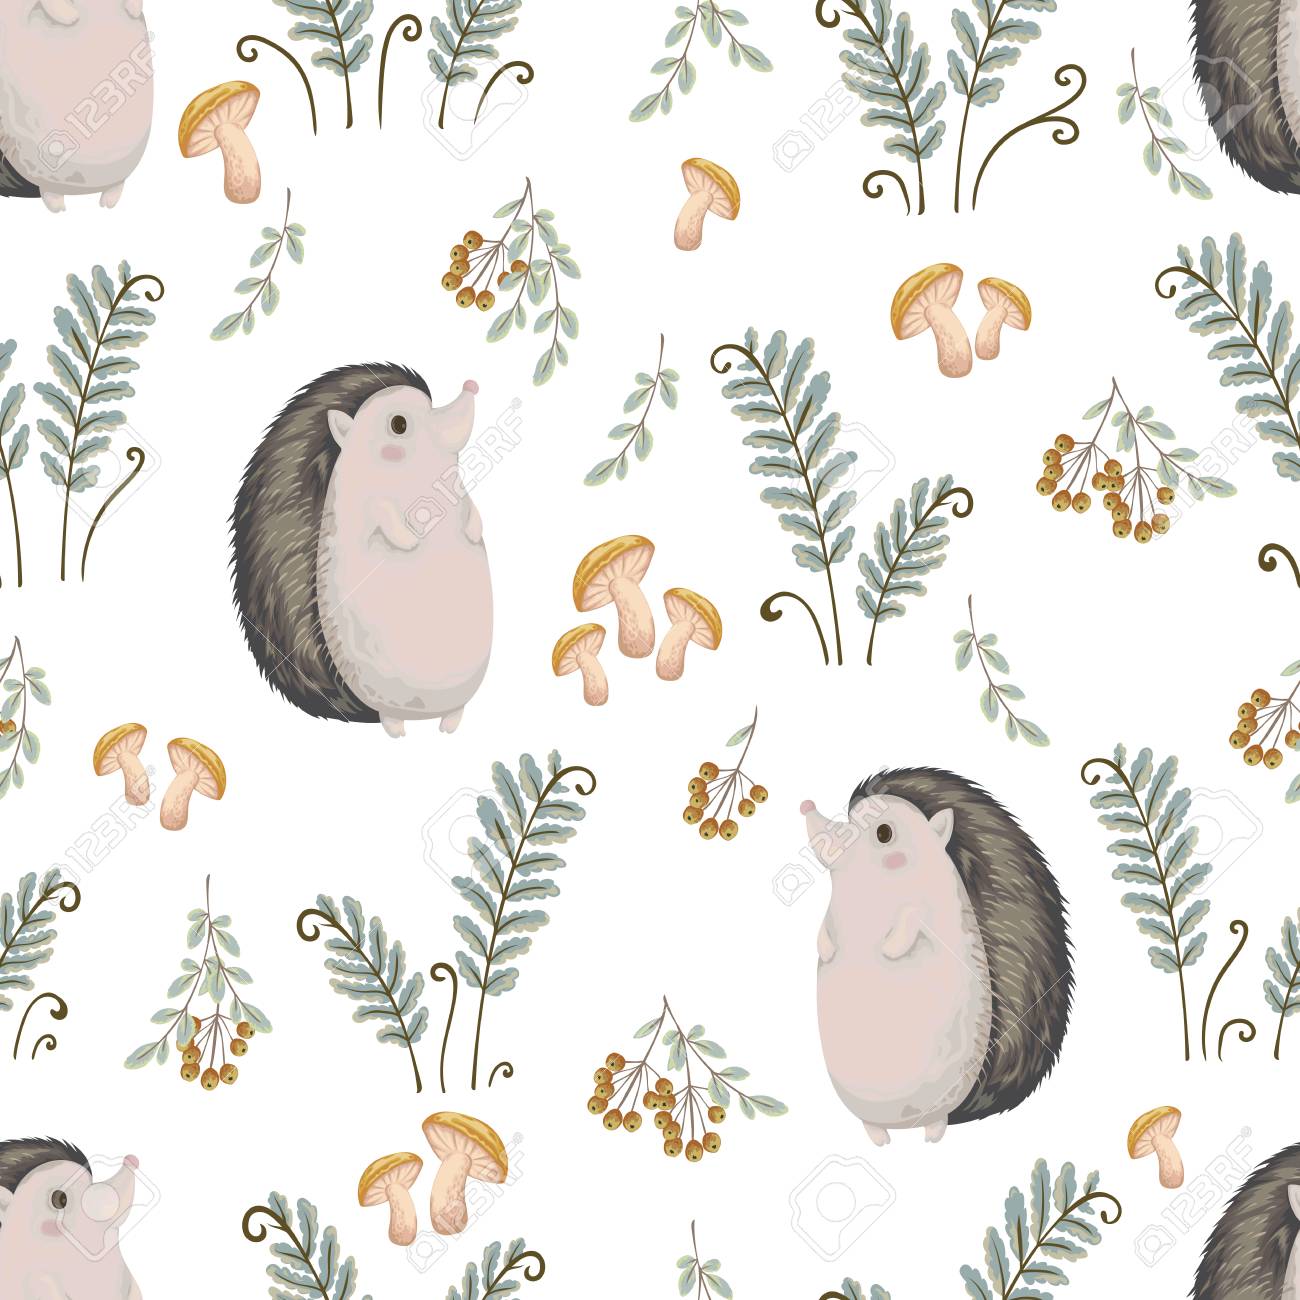 Seamless Pattern With Hedgehog Fern Mushrooms Tree Branches And